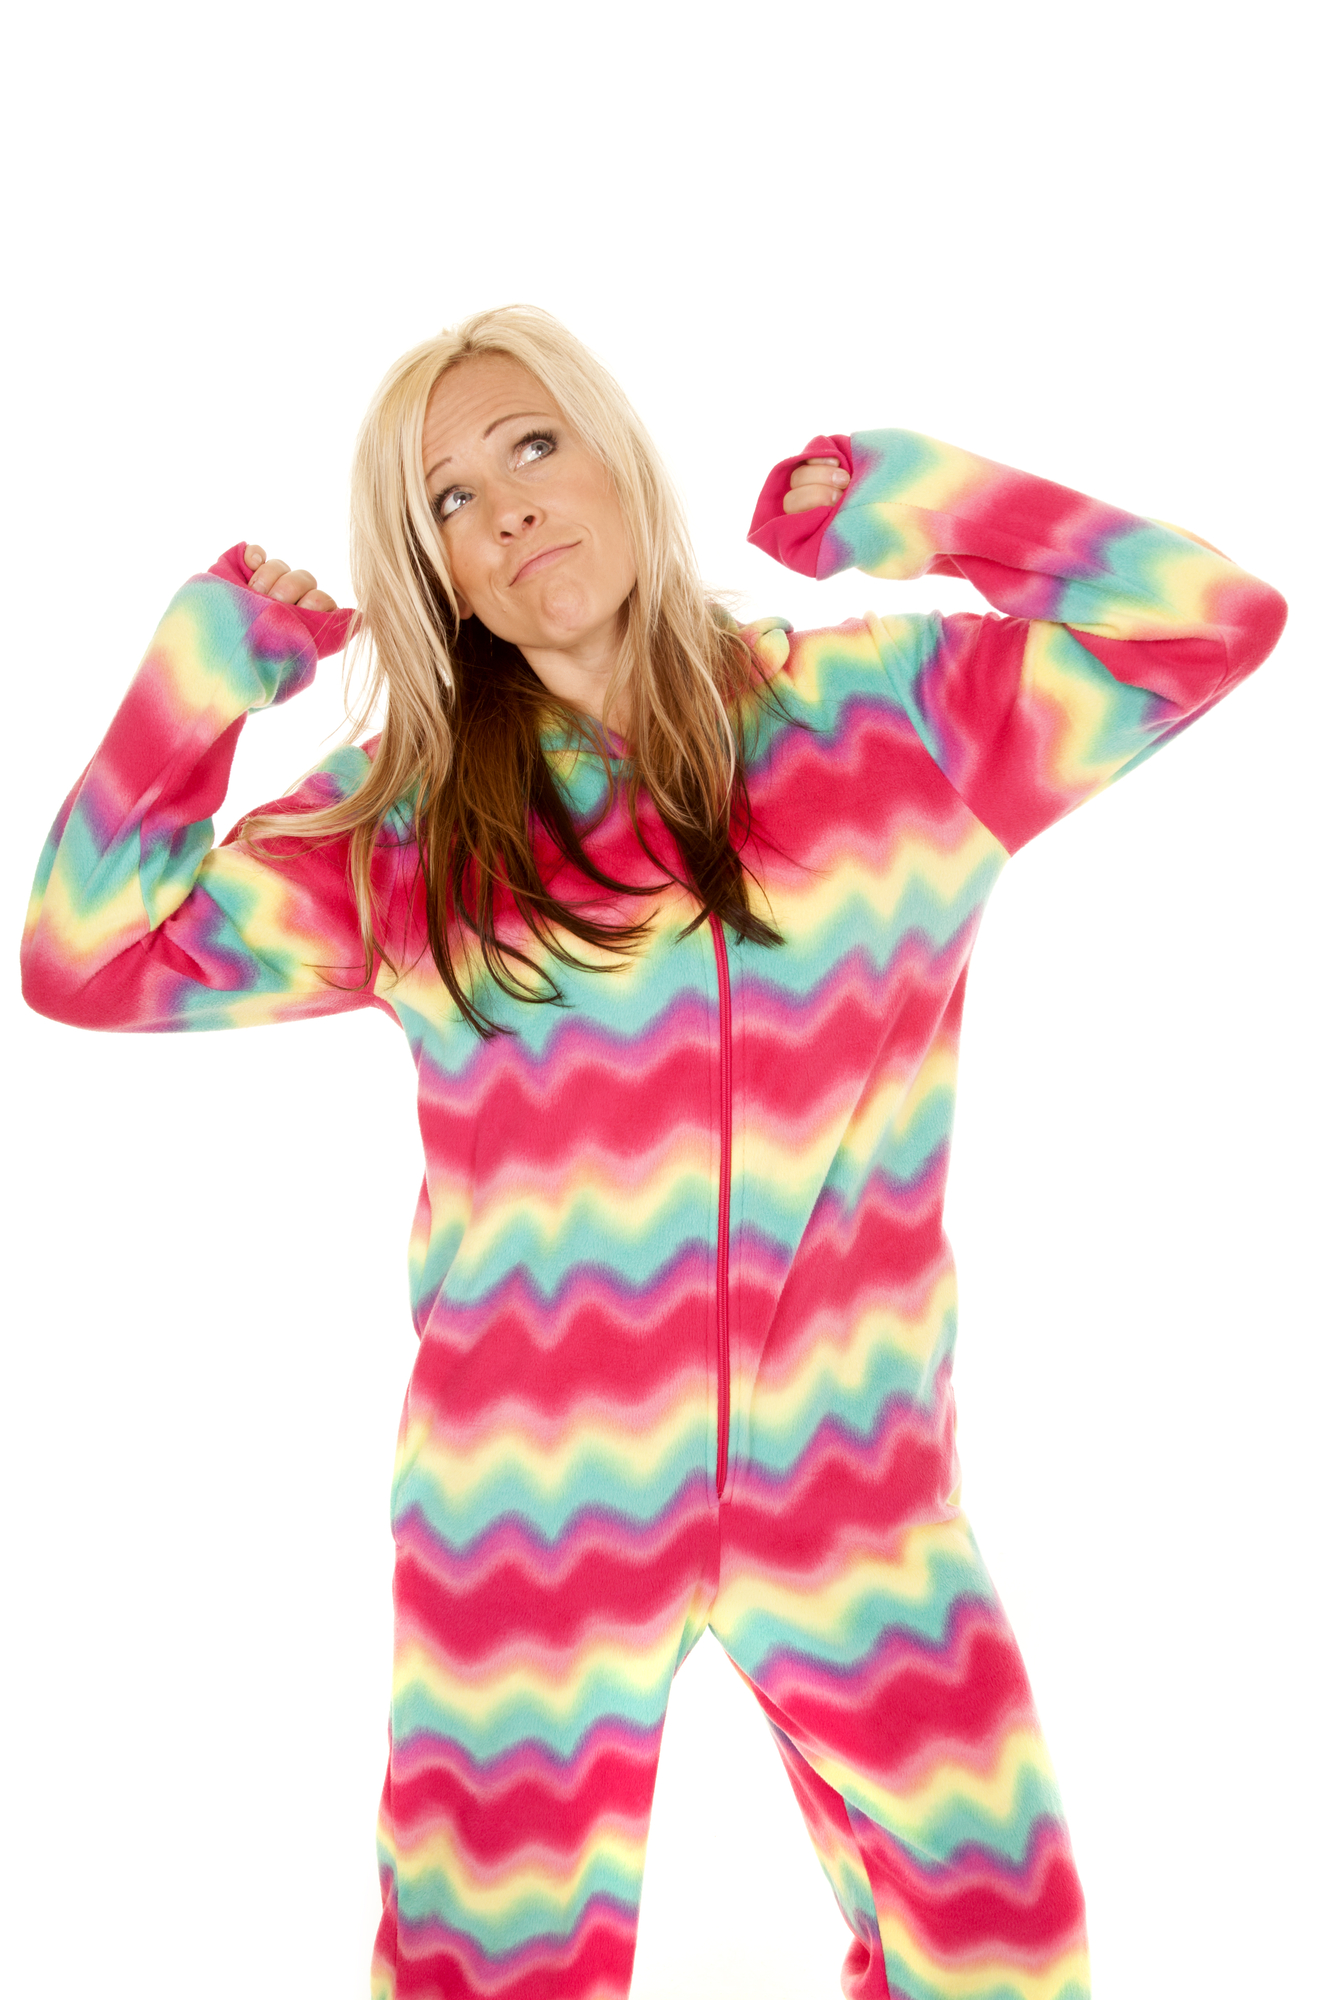 A woman in a colorful onesie participating in the Pajama Crawl event, while striking a pose for the camera.